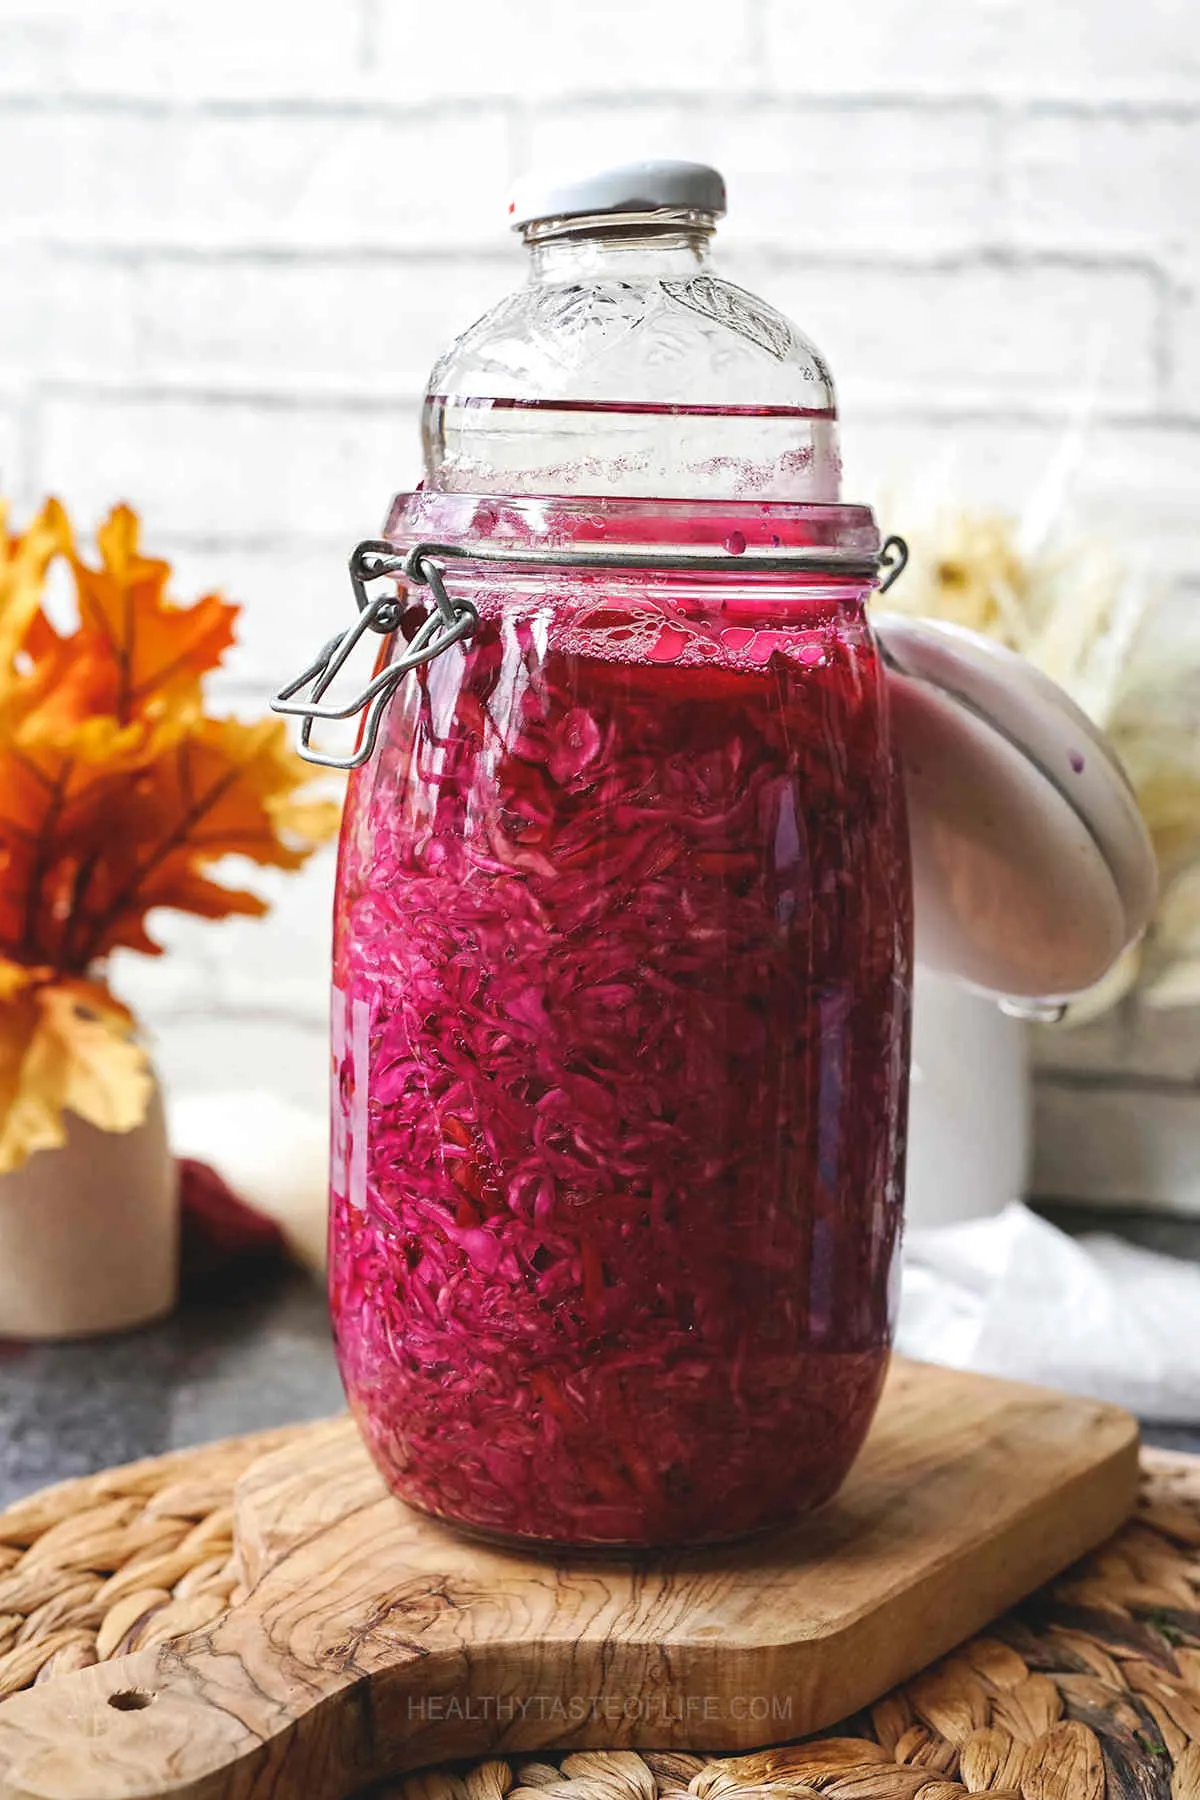 Red cabbage sauerkraut after 3 days of fermenting (releasing bubbles) - it changes the color from purple to dark red,